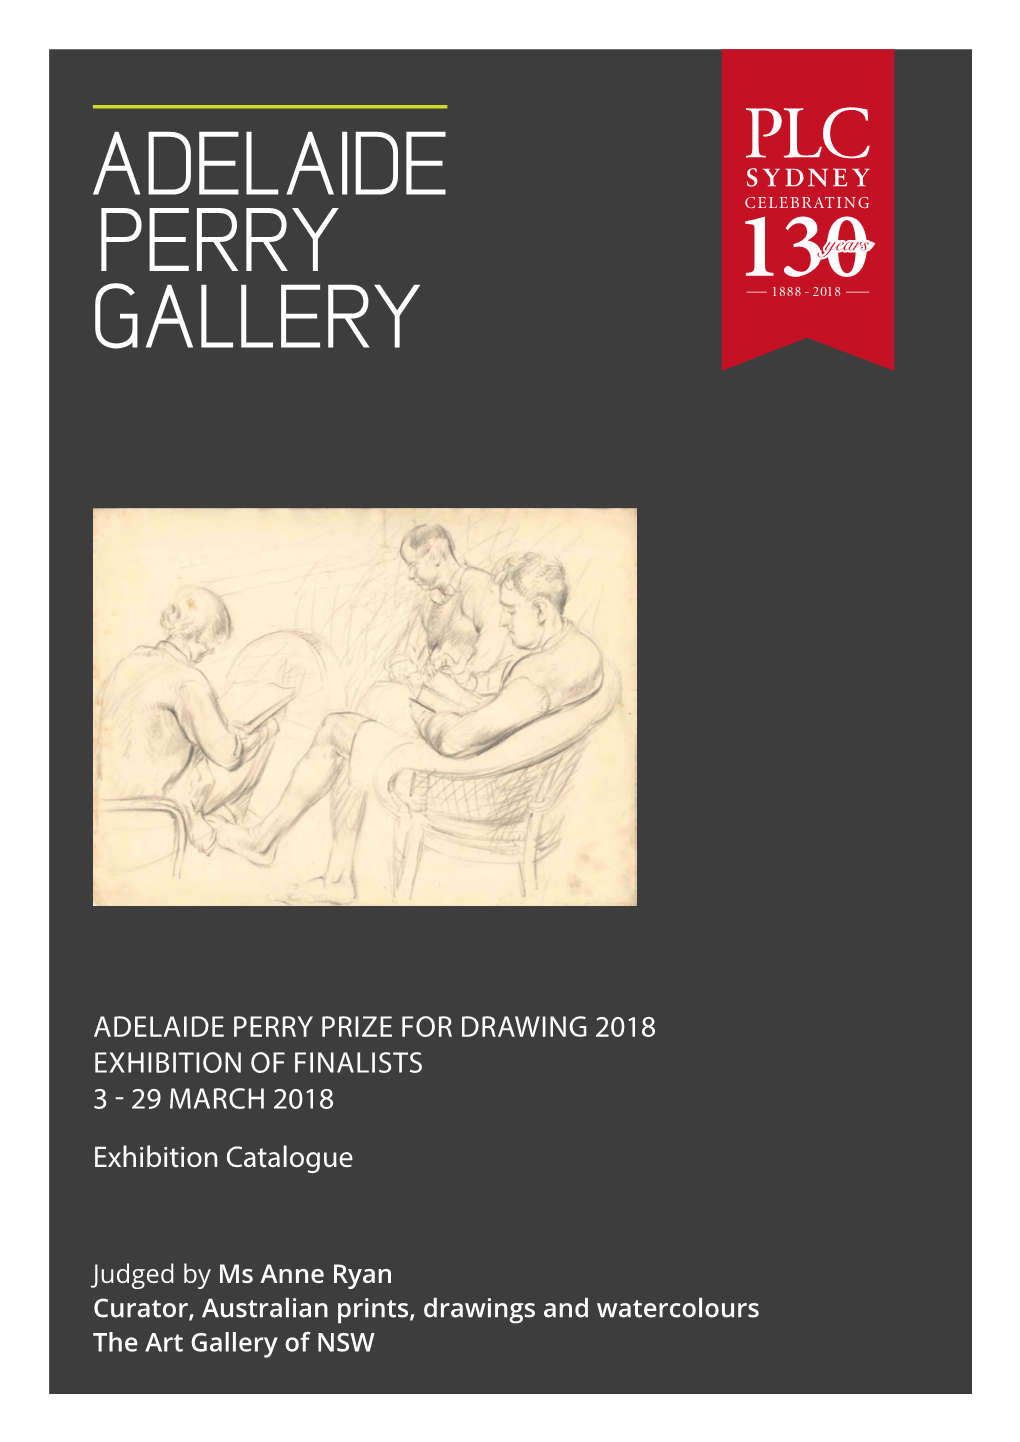 Exhibition Catalogue ADELAIDE PERRY PRIZE FOR